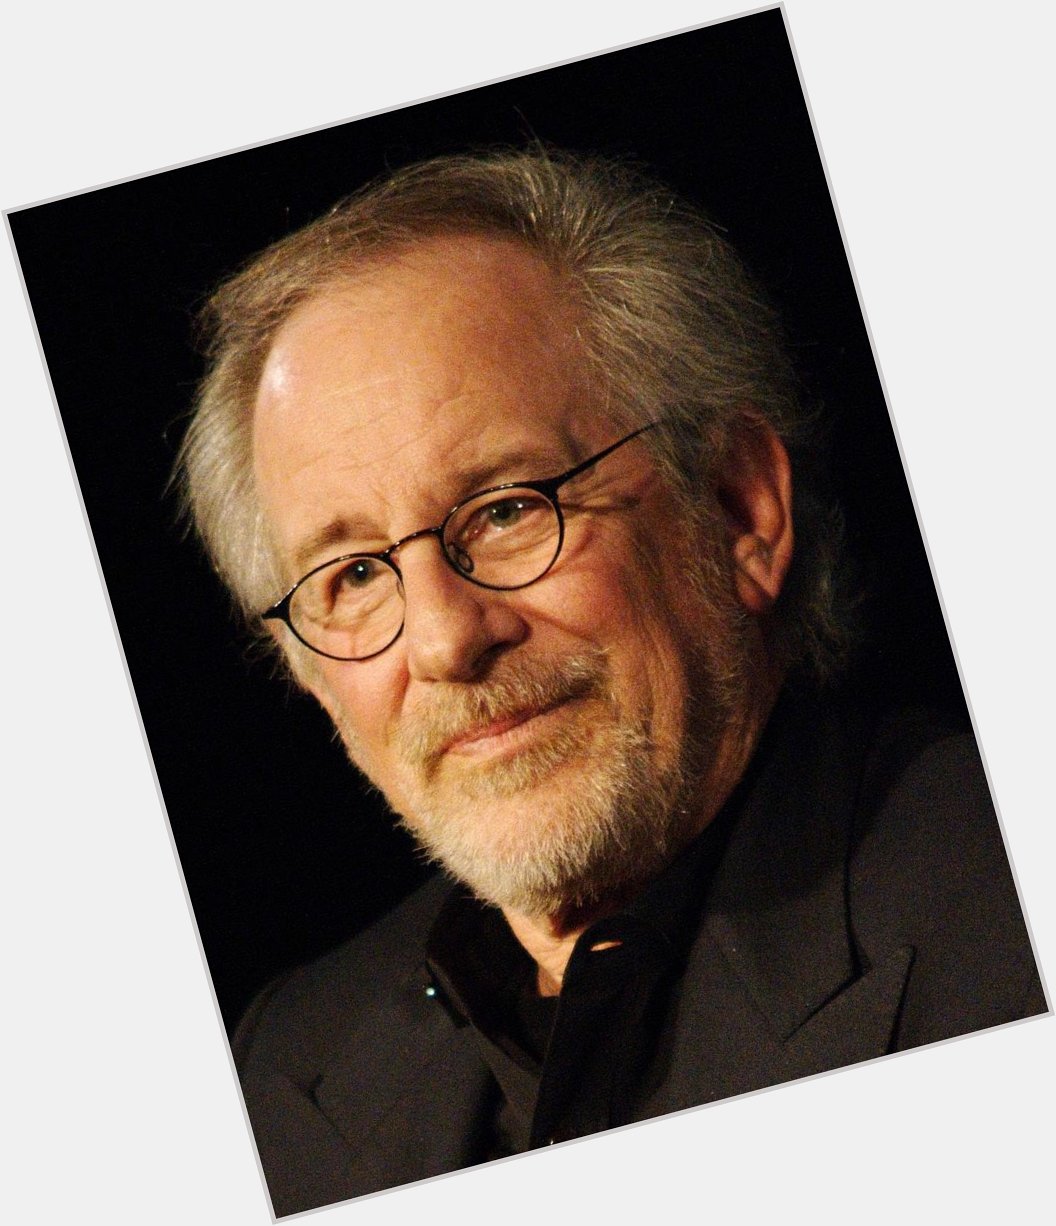 Happy Birthday to film director Steven Spielberg who turns 75 today     